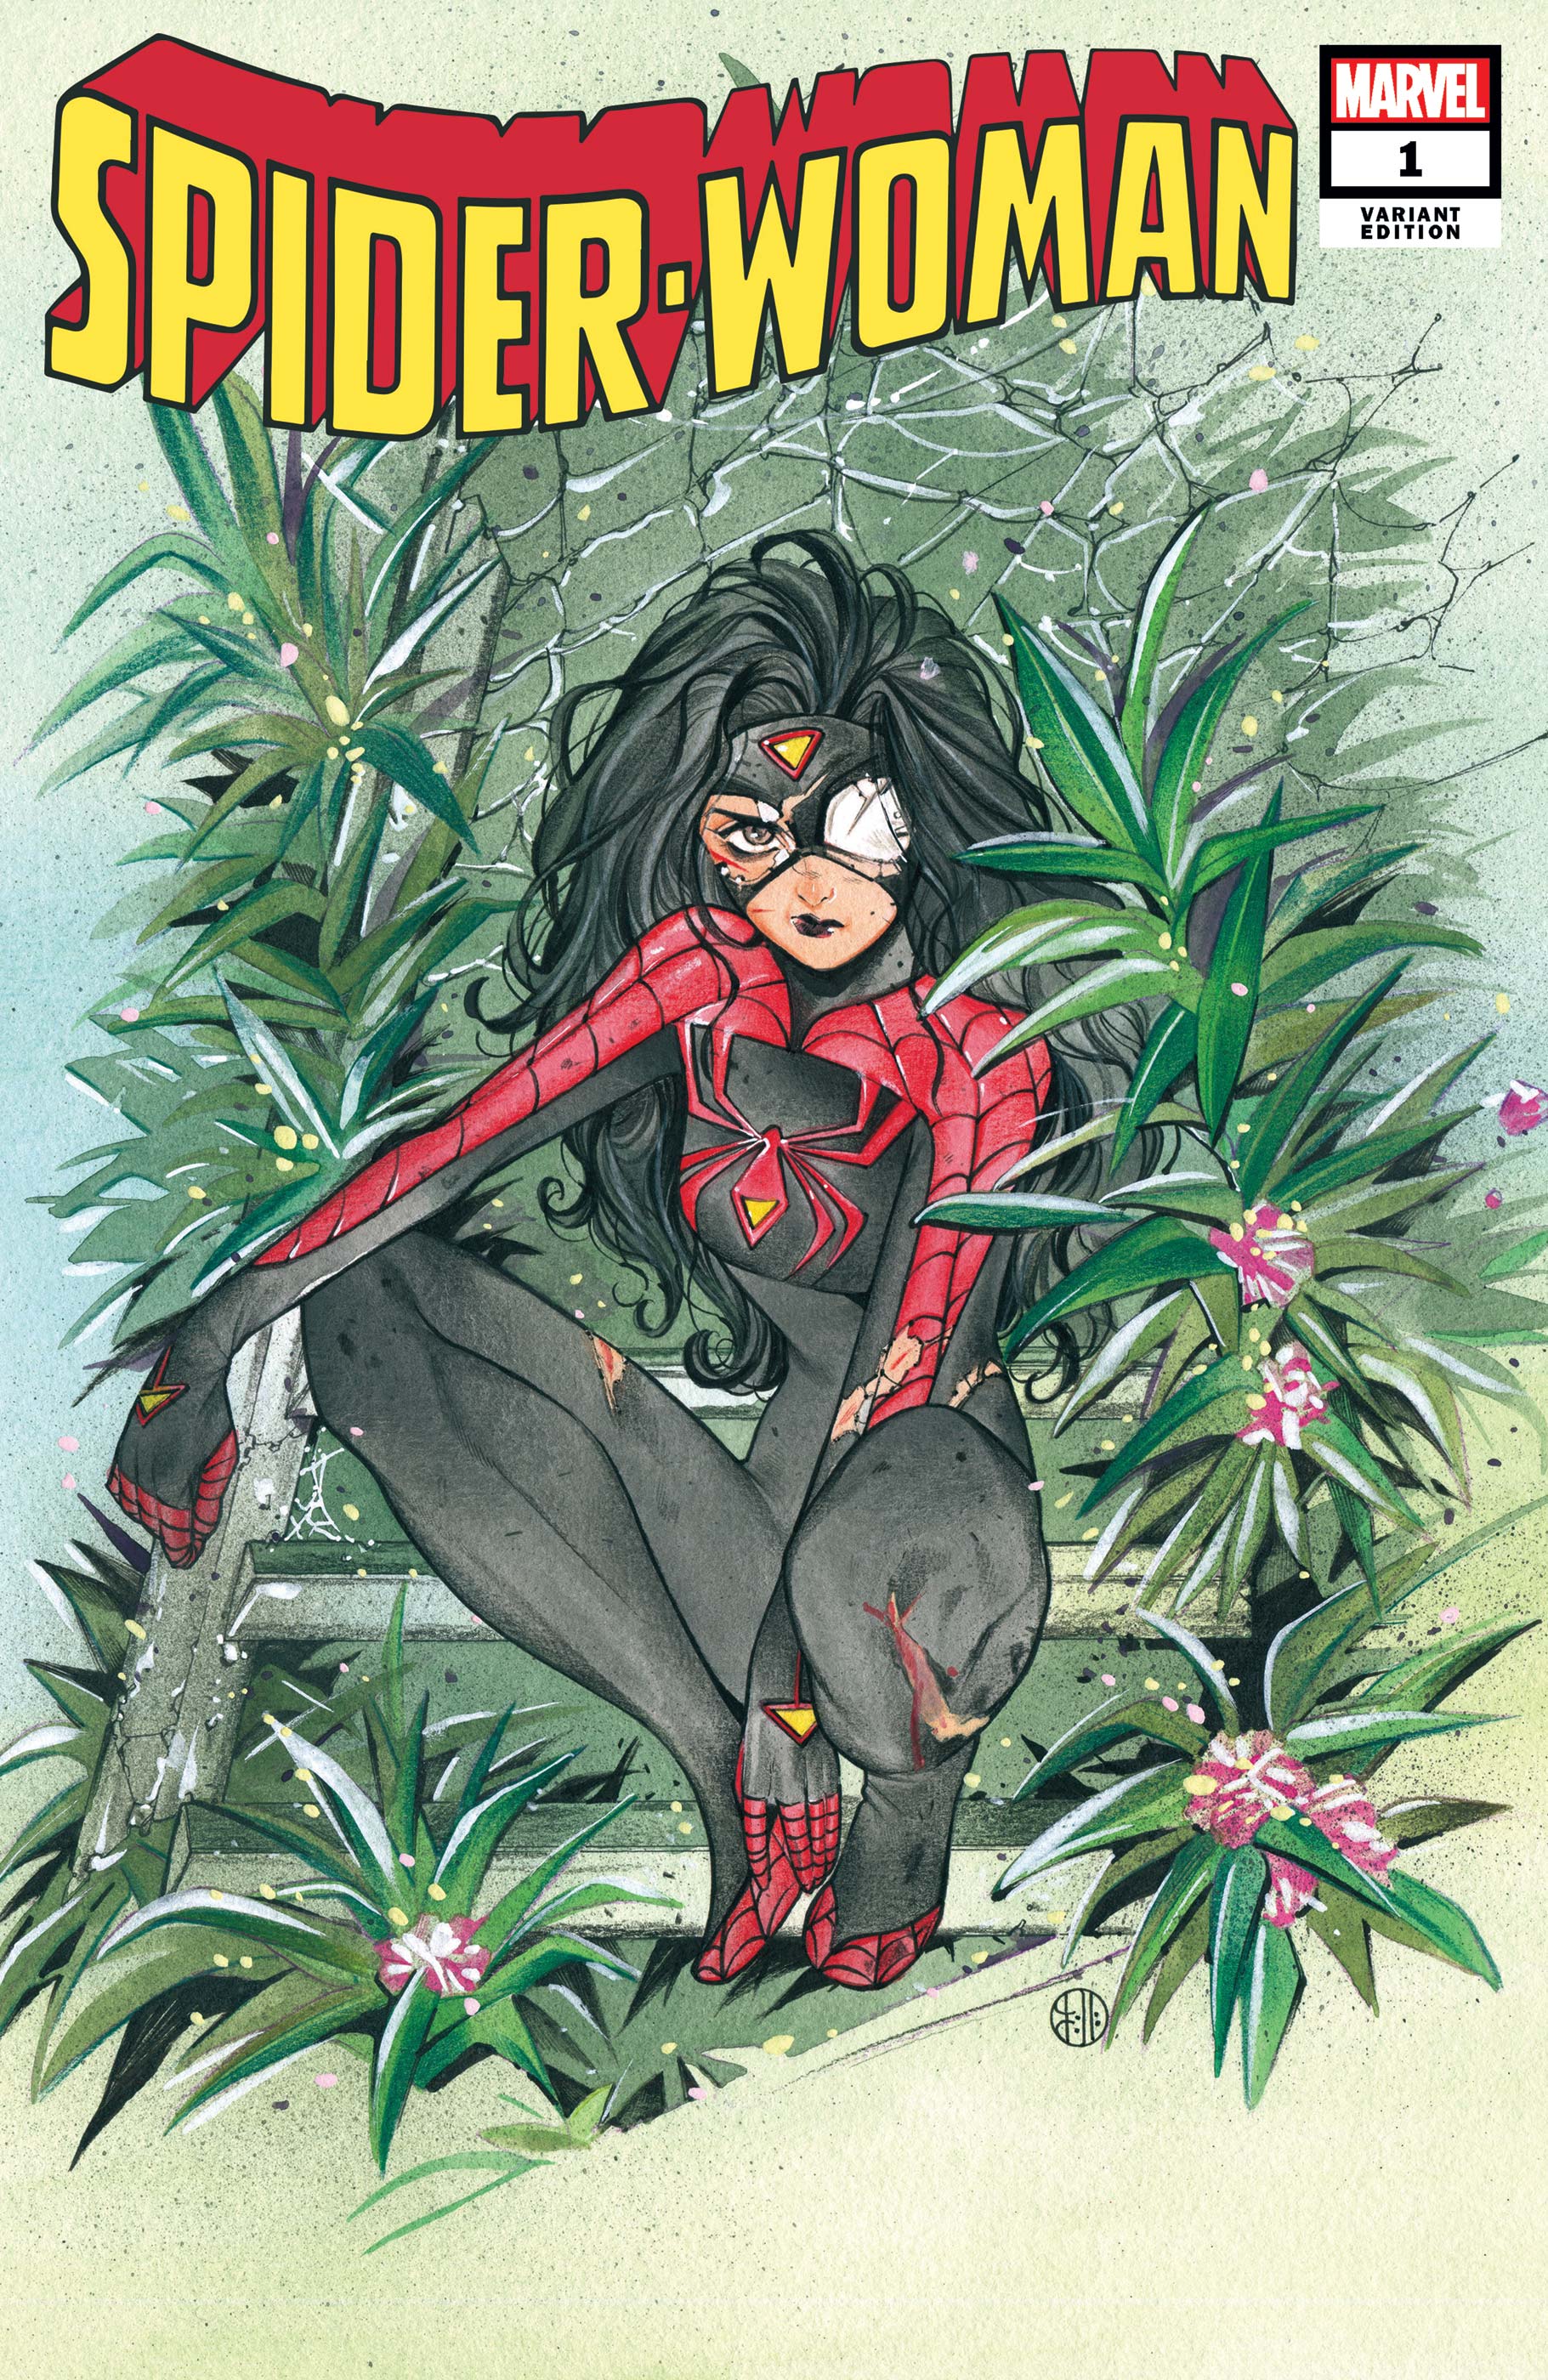 Spider-Woman (2020) #1 (Variant)